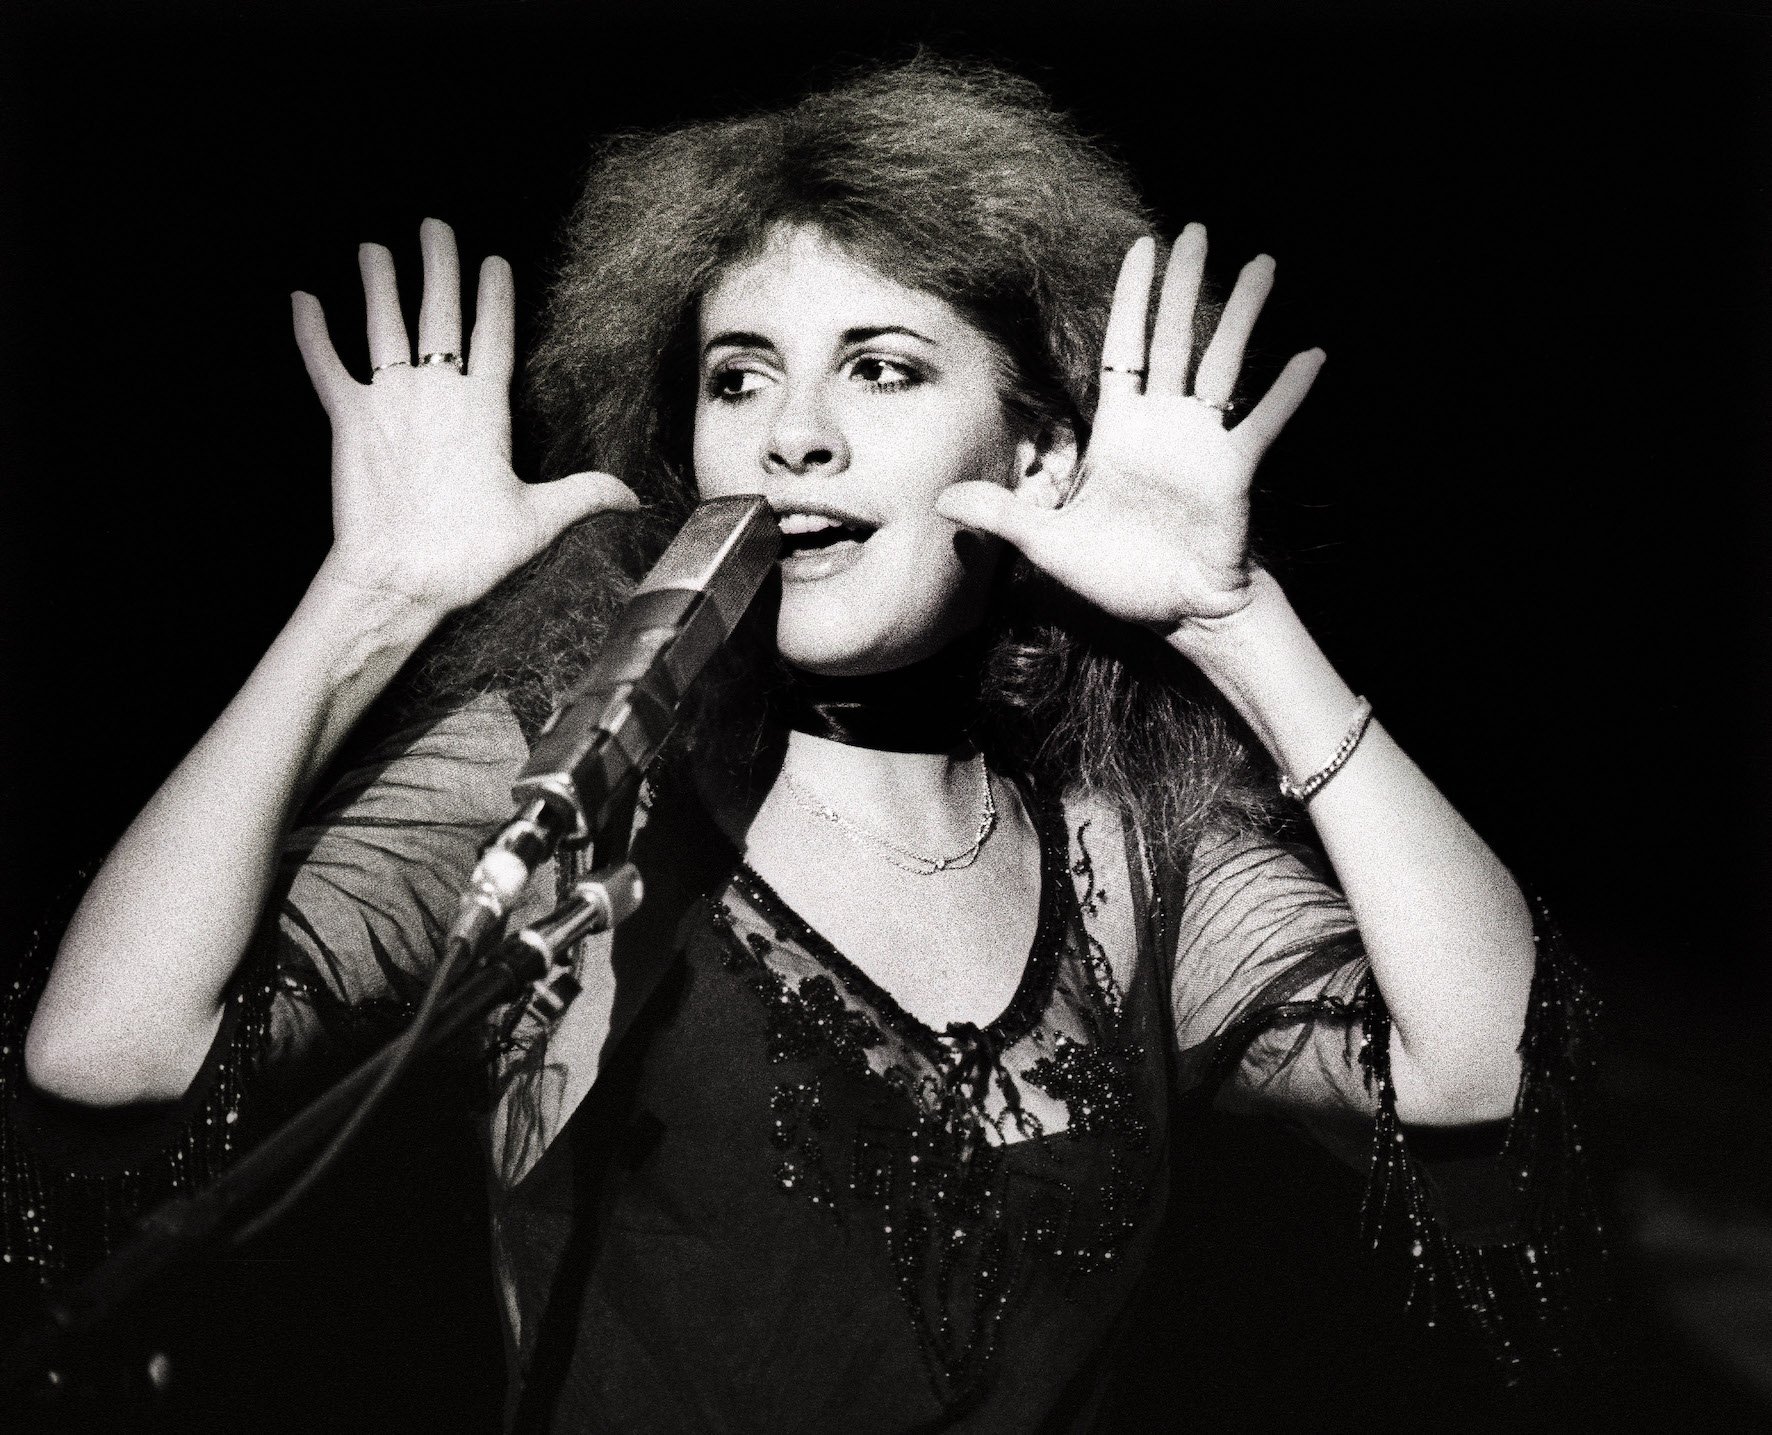 Stevie Nicks performs with Fleetwood Mac in Rotterdam, Netherlands